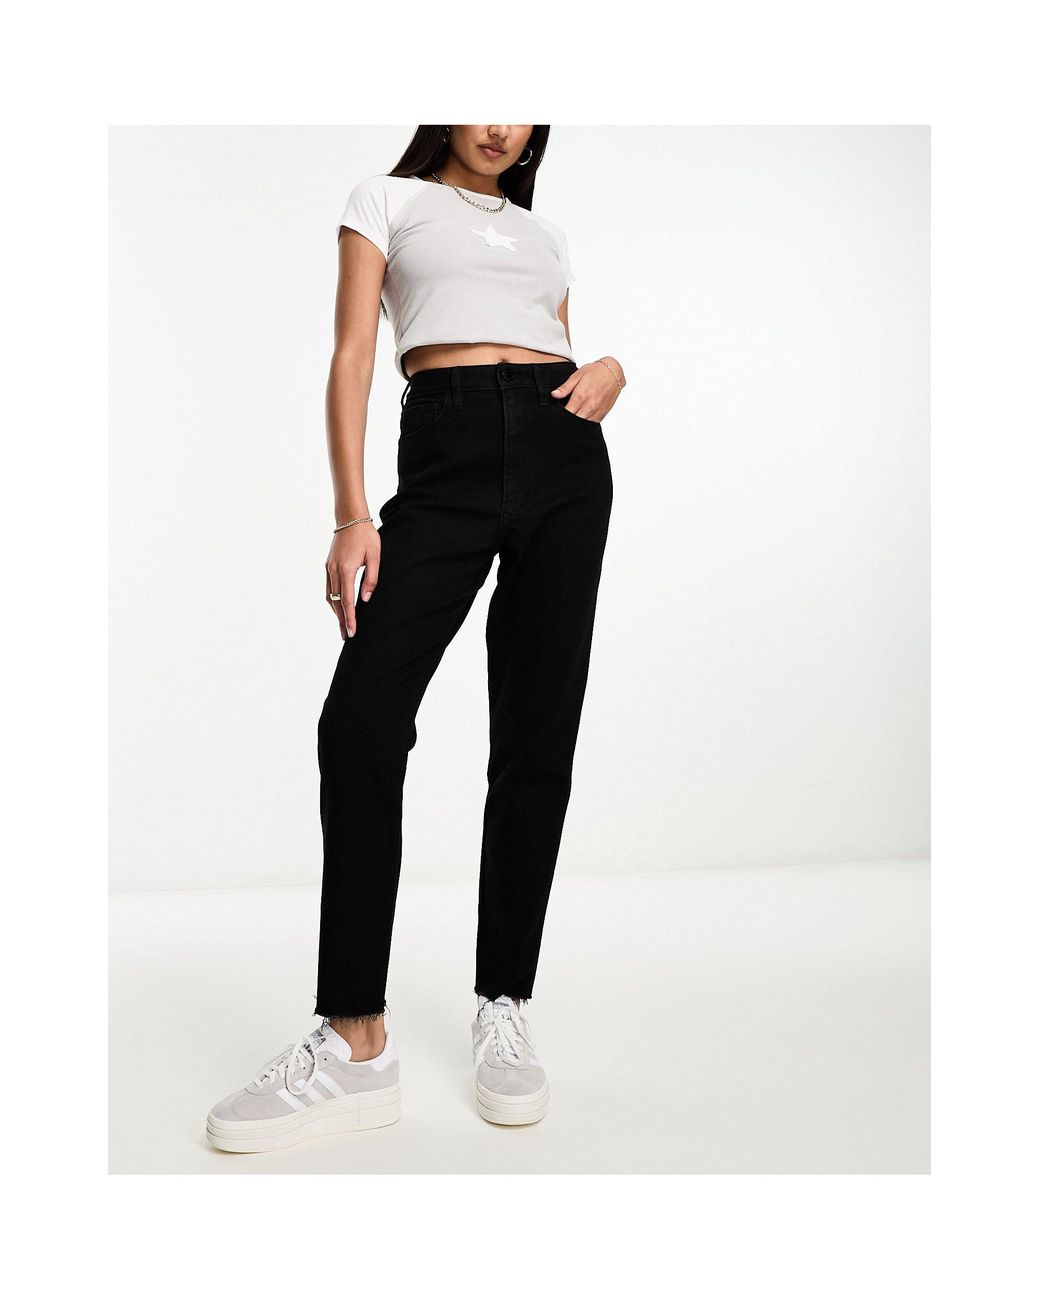 Hollister fit high rise jeans in black